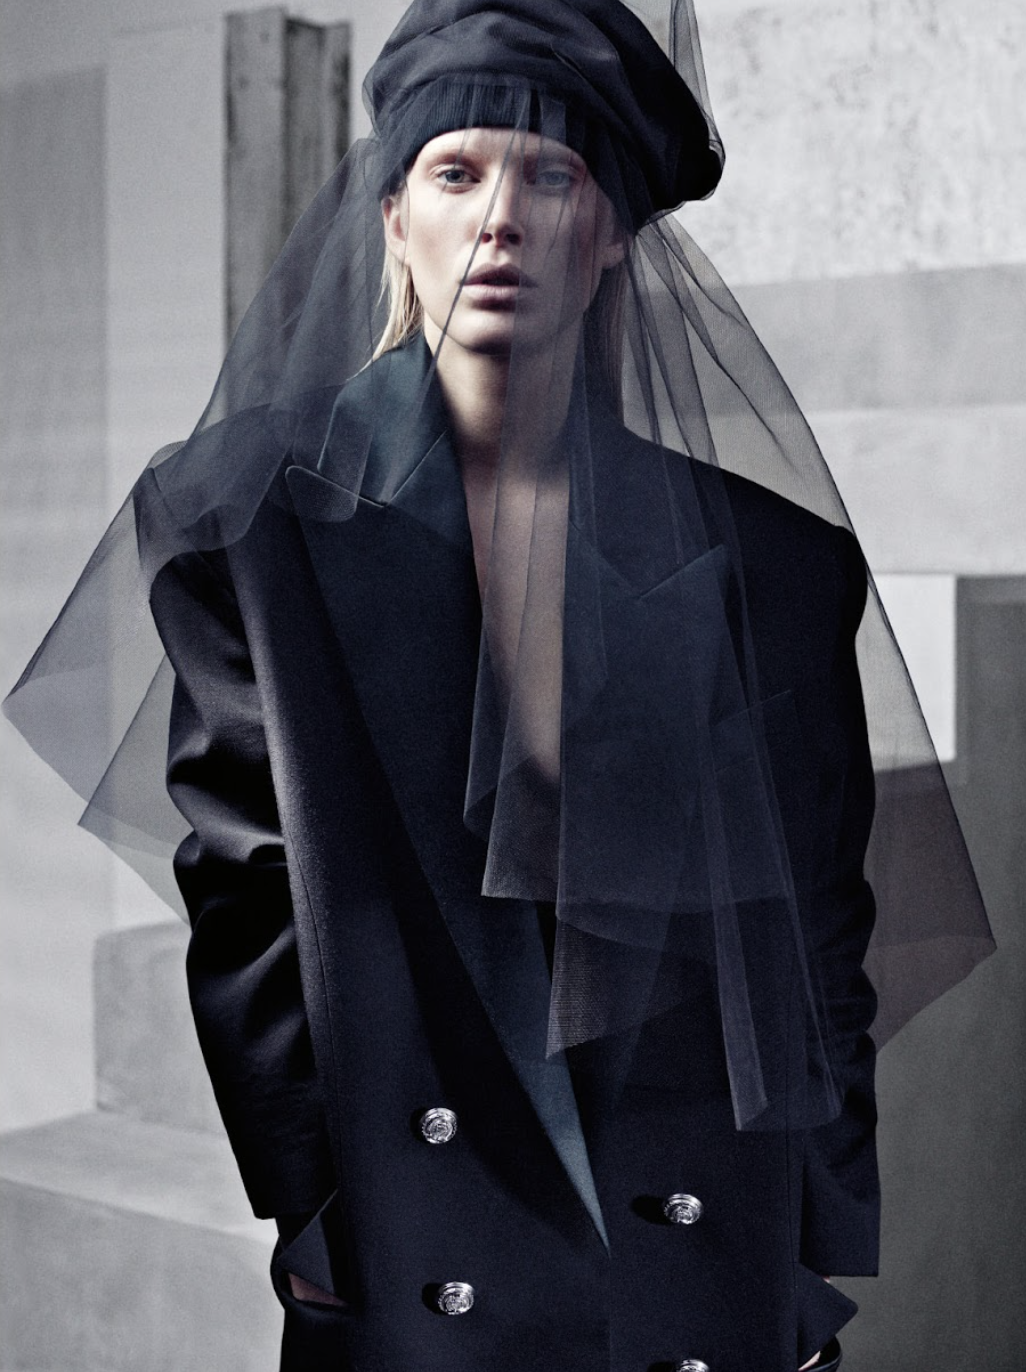 Iselin-Steiro-by-Craig-McDean-Vogue-UK-March-2013-11.png